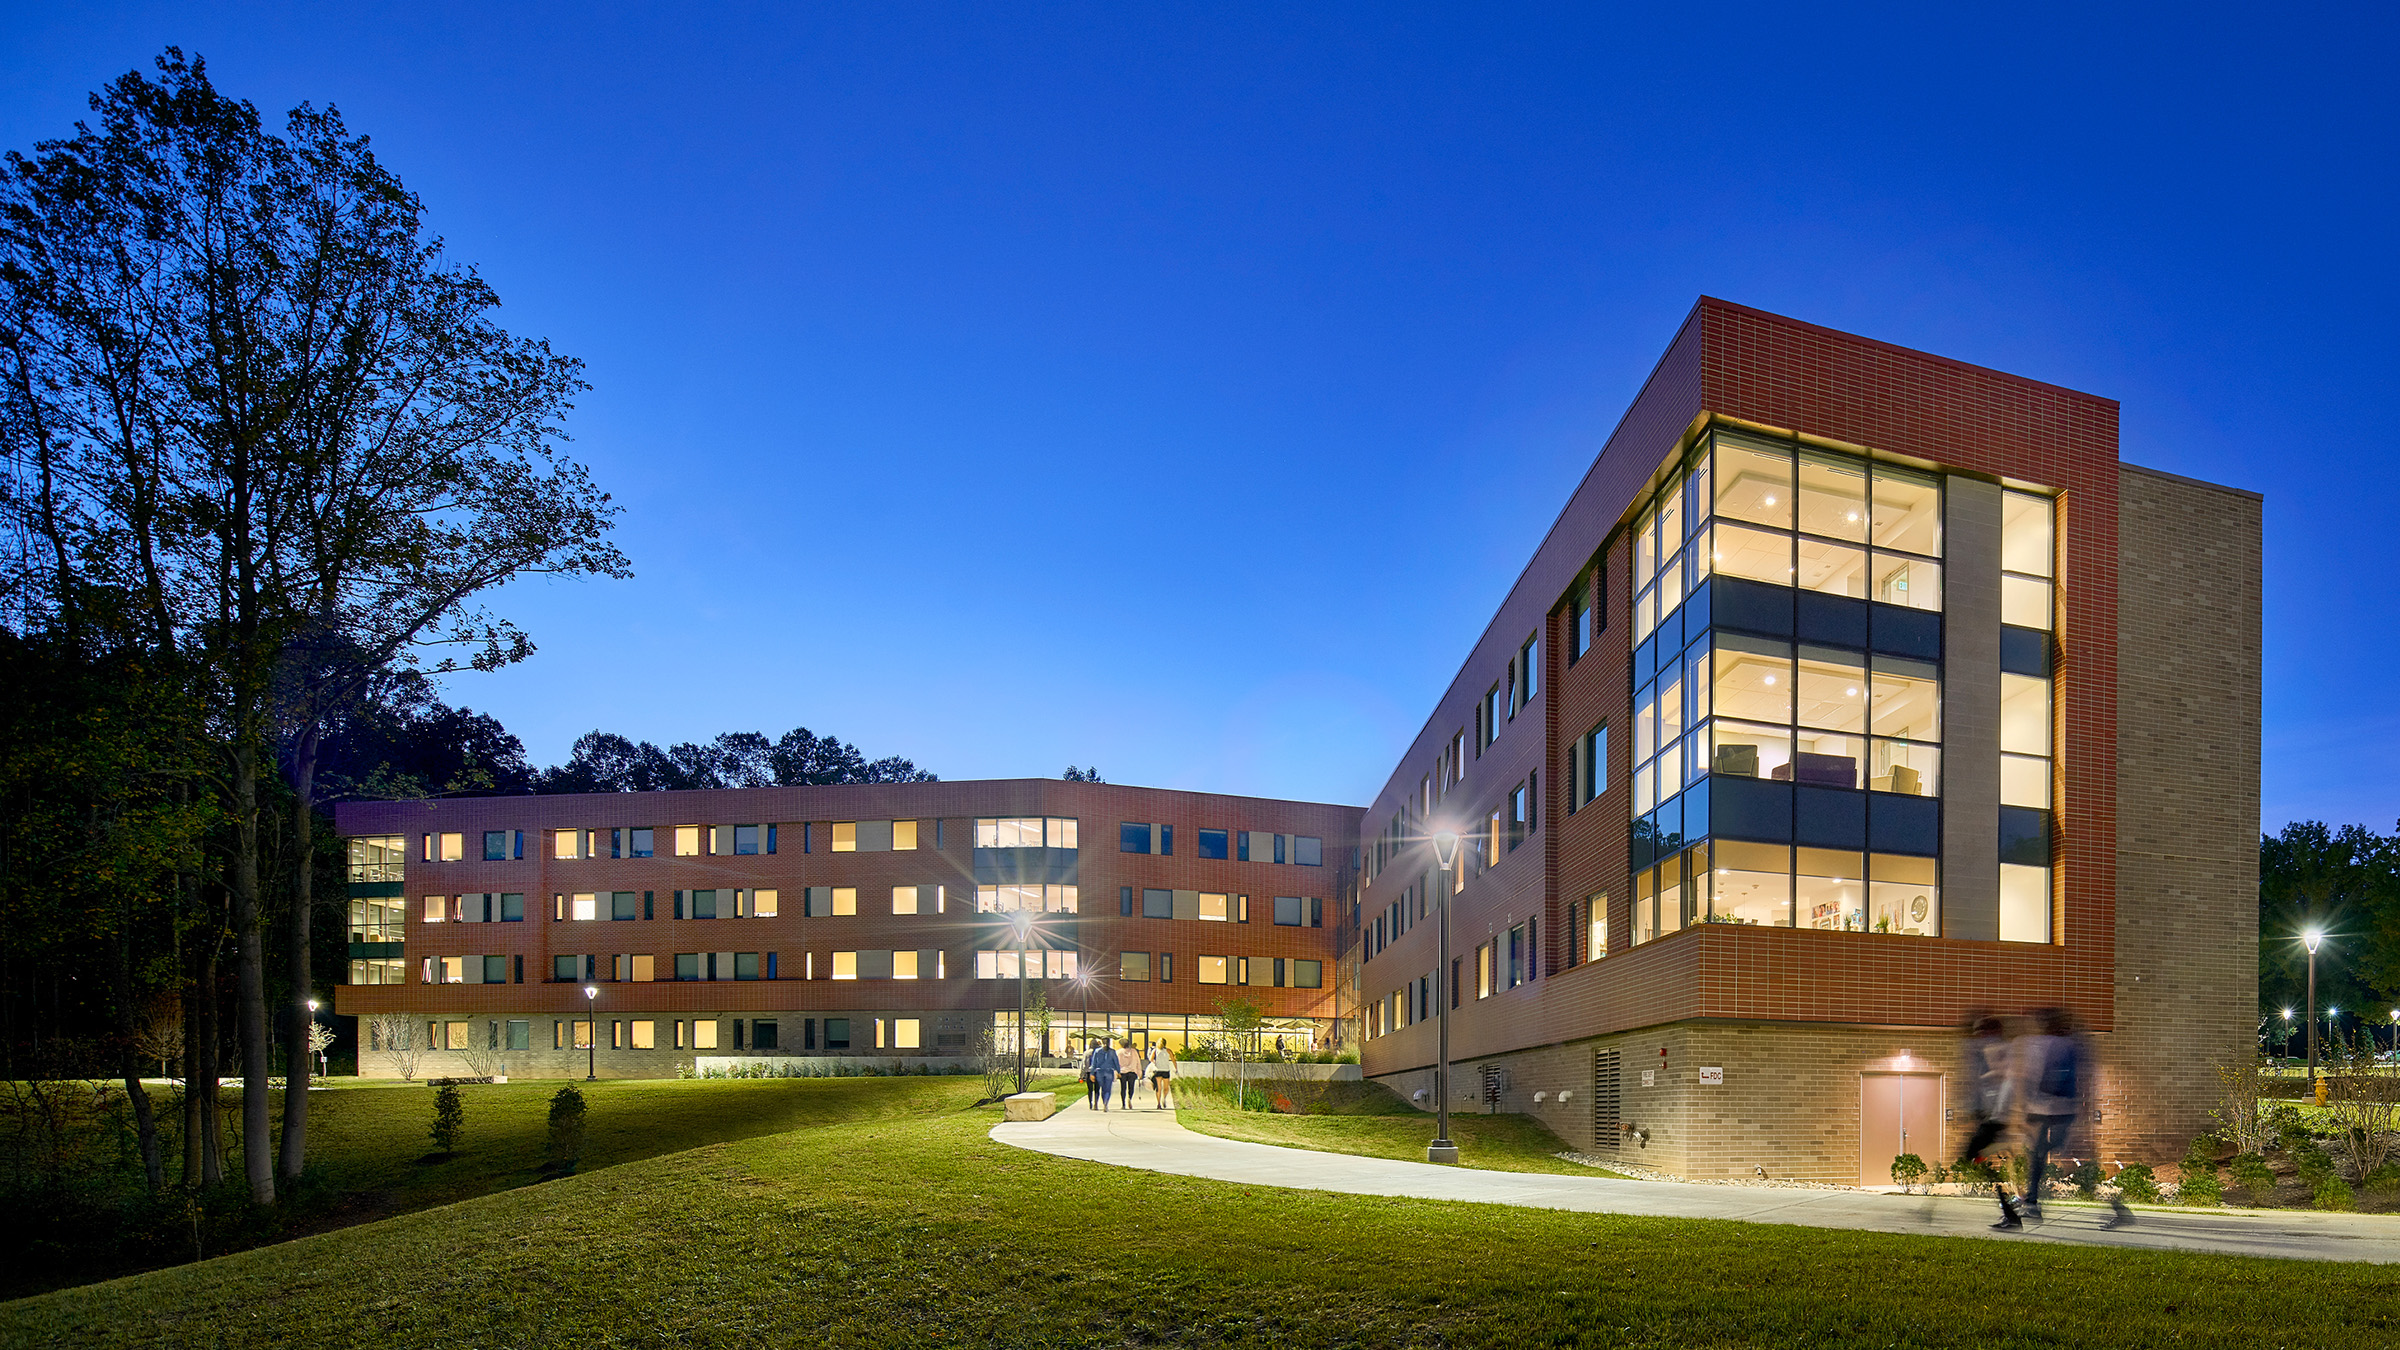 Orchard Residence Hall at Penn State Brandwine campus in Media, PA; Design Architect: Clark Nexsen; Associate Architect: Spiezle Architectural Group